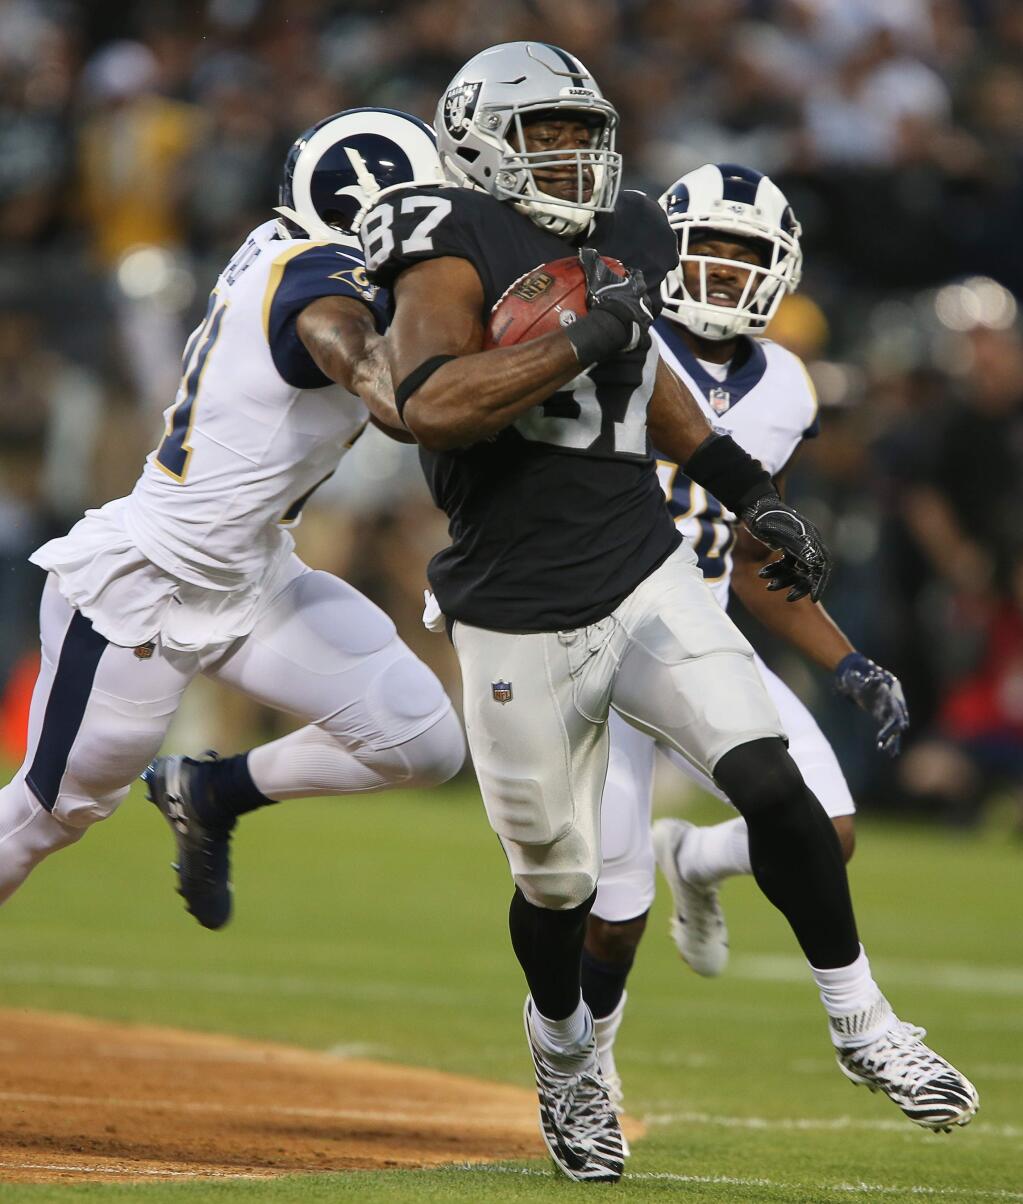 Oakland Raiders tight end Jared Cook makes a reception for 45-yards from quarterback Derek Carr against the Los Angeles Rams in Oakland on Monday, September 10, 2018. (Christopher Chung/ The Press Democrat)